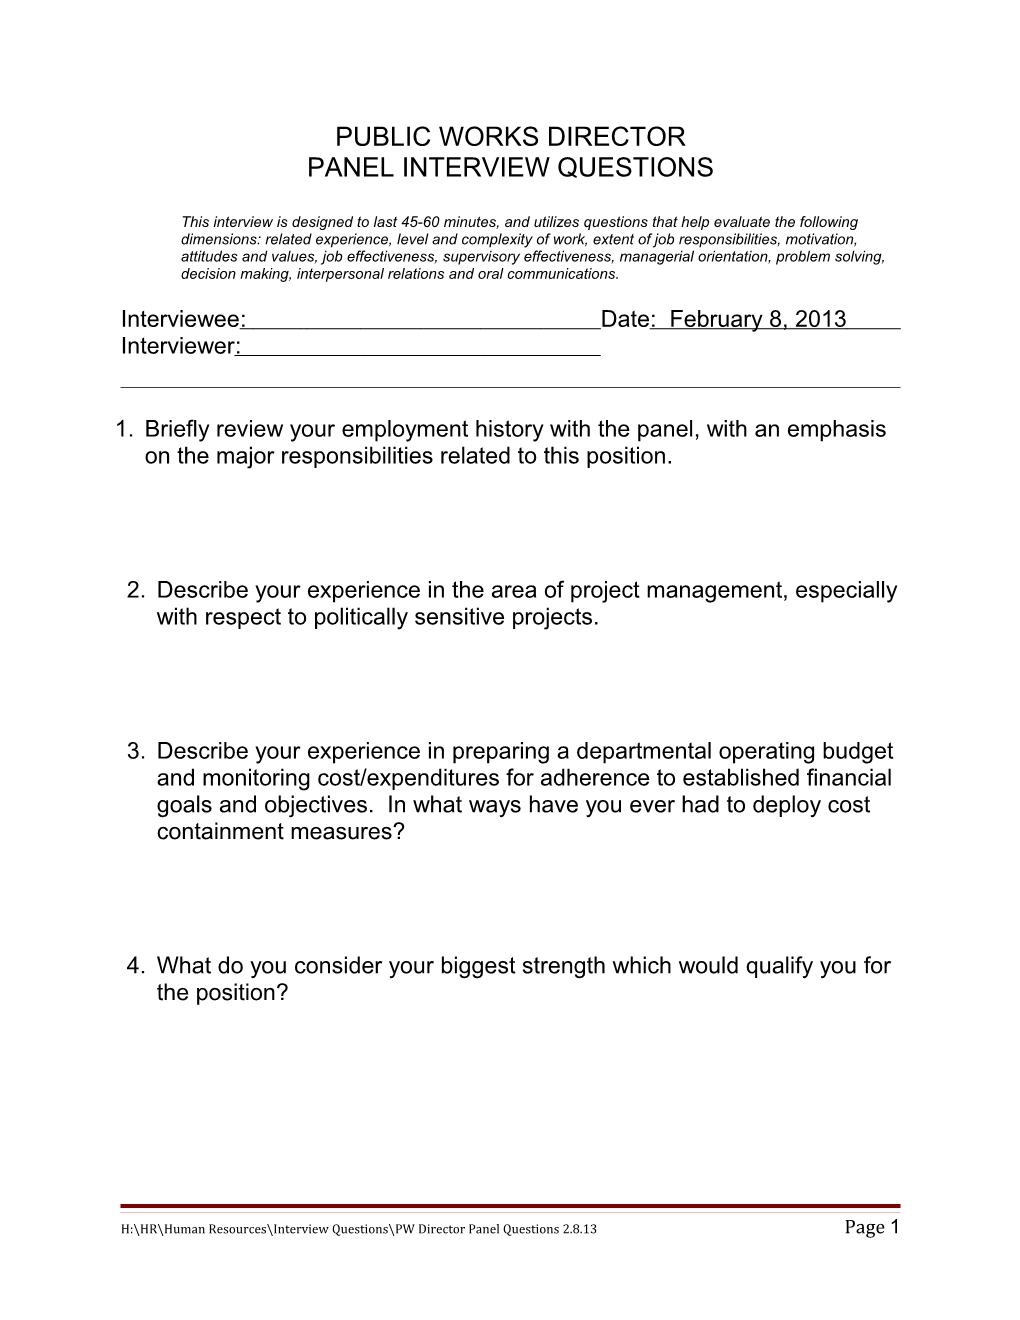 Sample Oral Interview